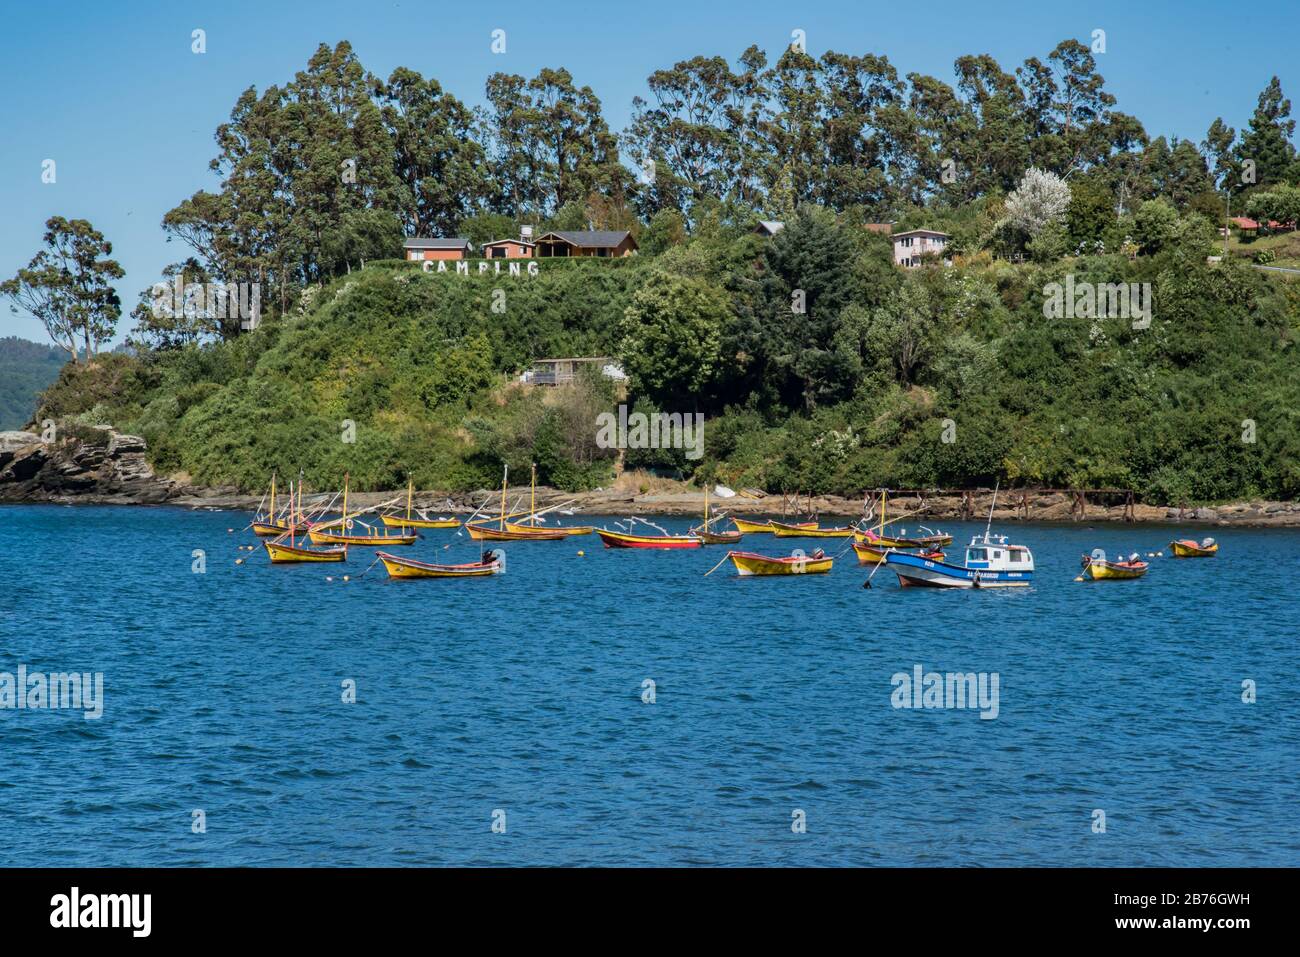 Camping sign on a cliff, Pacific Ocean and a bunch of fisher boats in Los Molinos, Valdivia, Chile Stock Photo